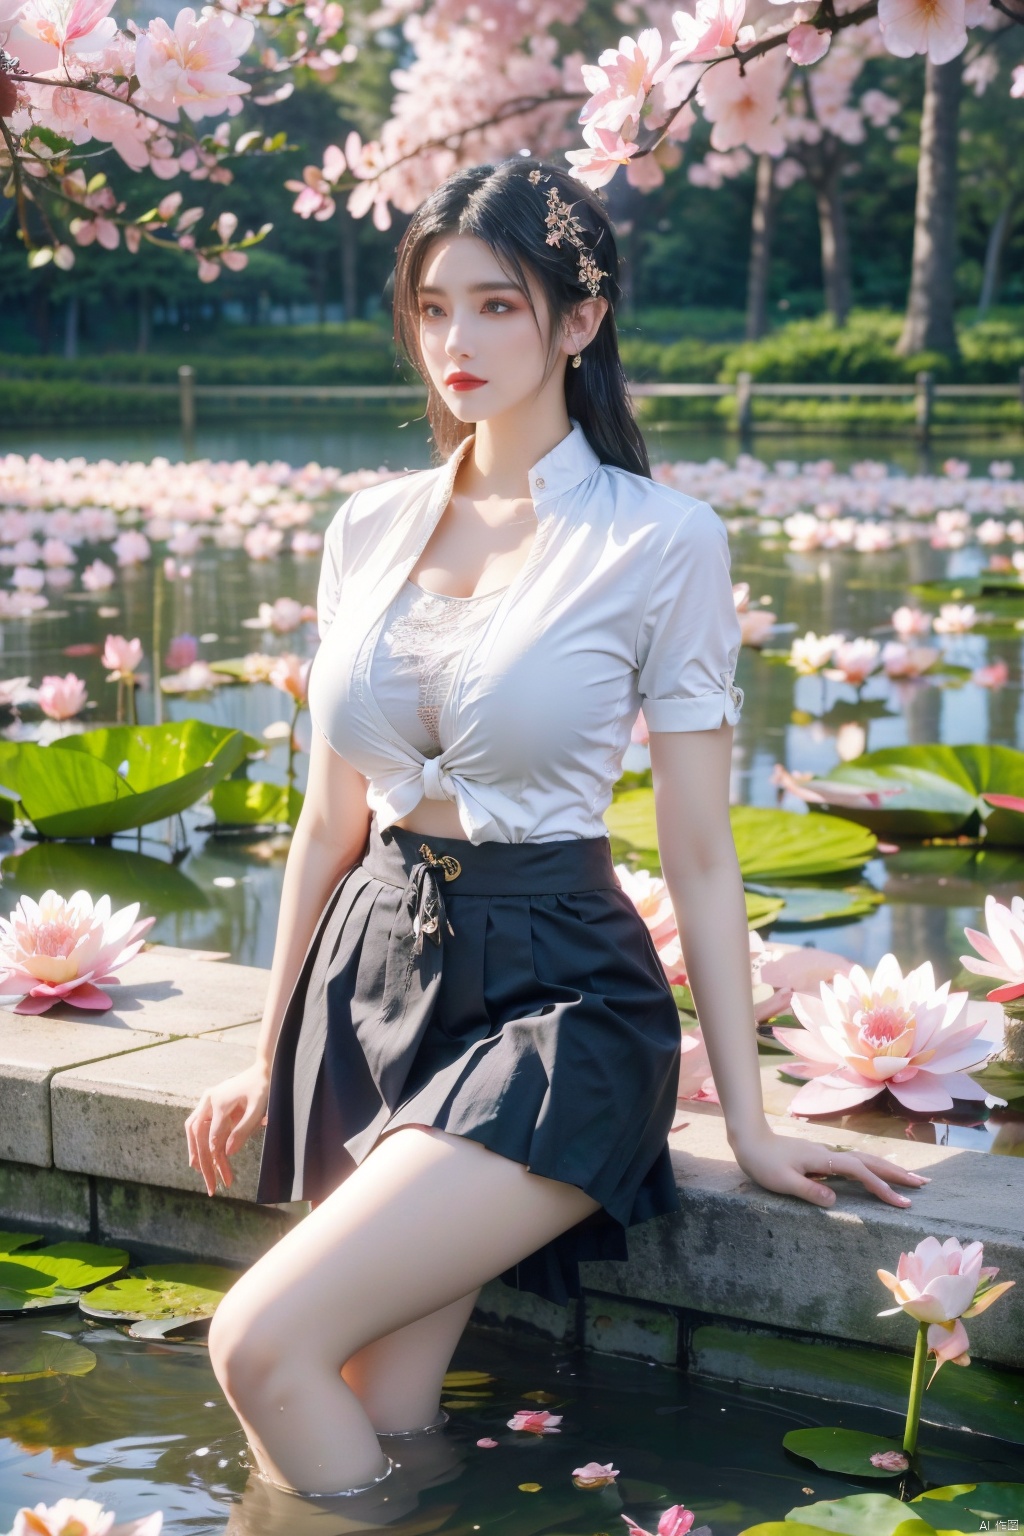  Best quality,masterpiece, 1girl,business shirt, (huge breasts:1.59)(Tie), (Exposed thighs:1.3), (mini skirt:1.3), (pleated skirt:1.3),1 girl,(Sitting on the grass in the park with a lotus pond in the background:1.3),(Lotus, cherry blossom, water lily:1.53),(huge breasts:1.79),,moyou,yuzu